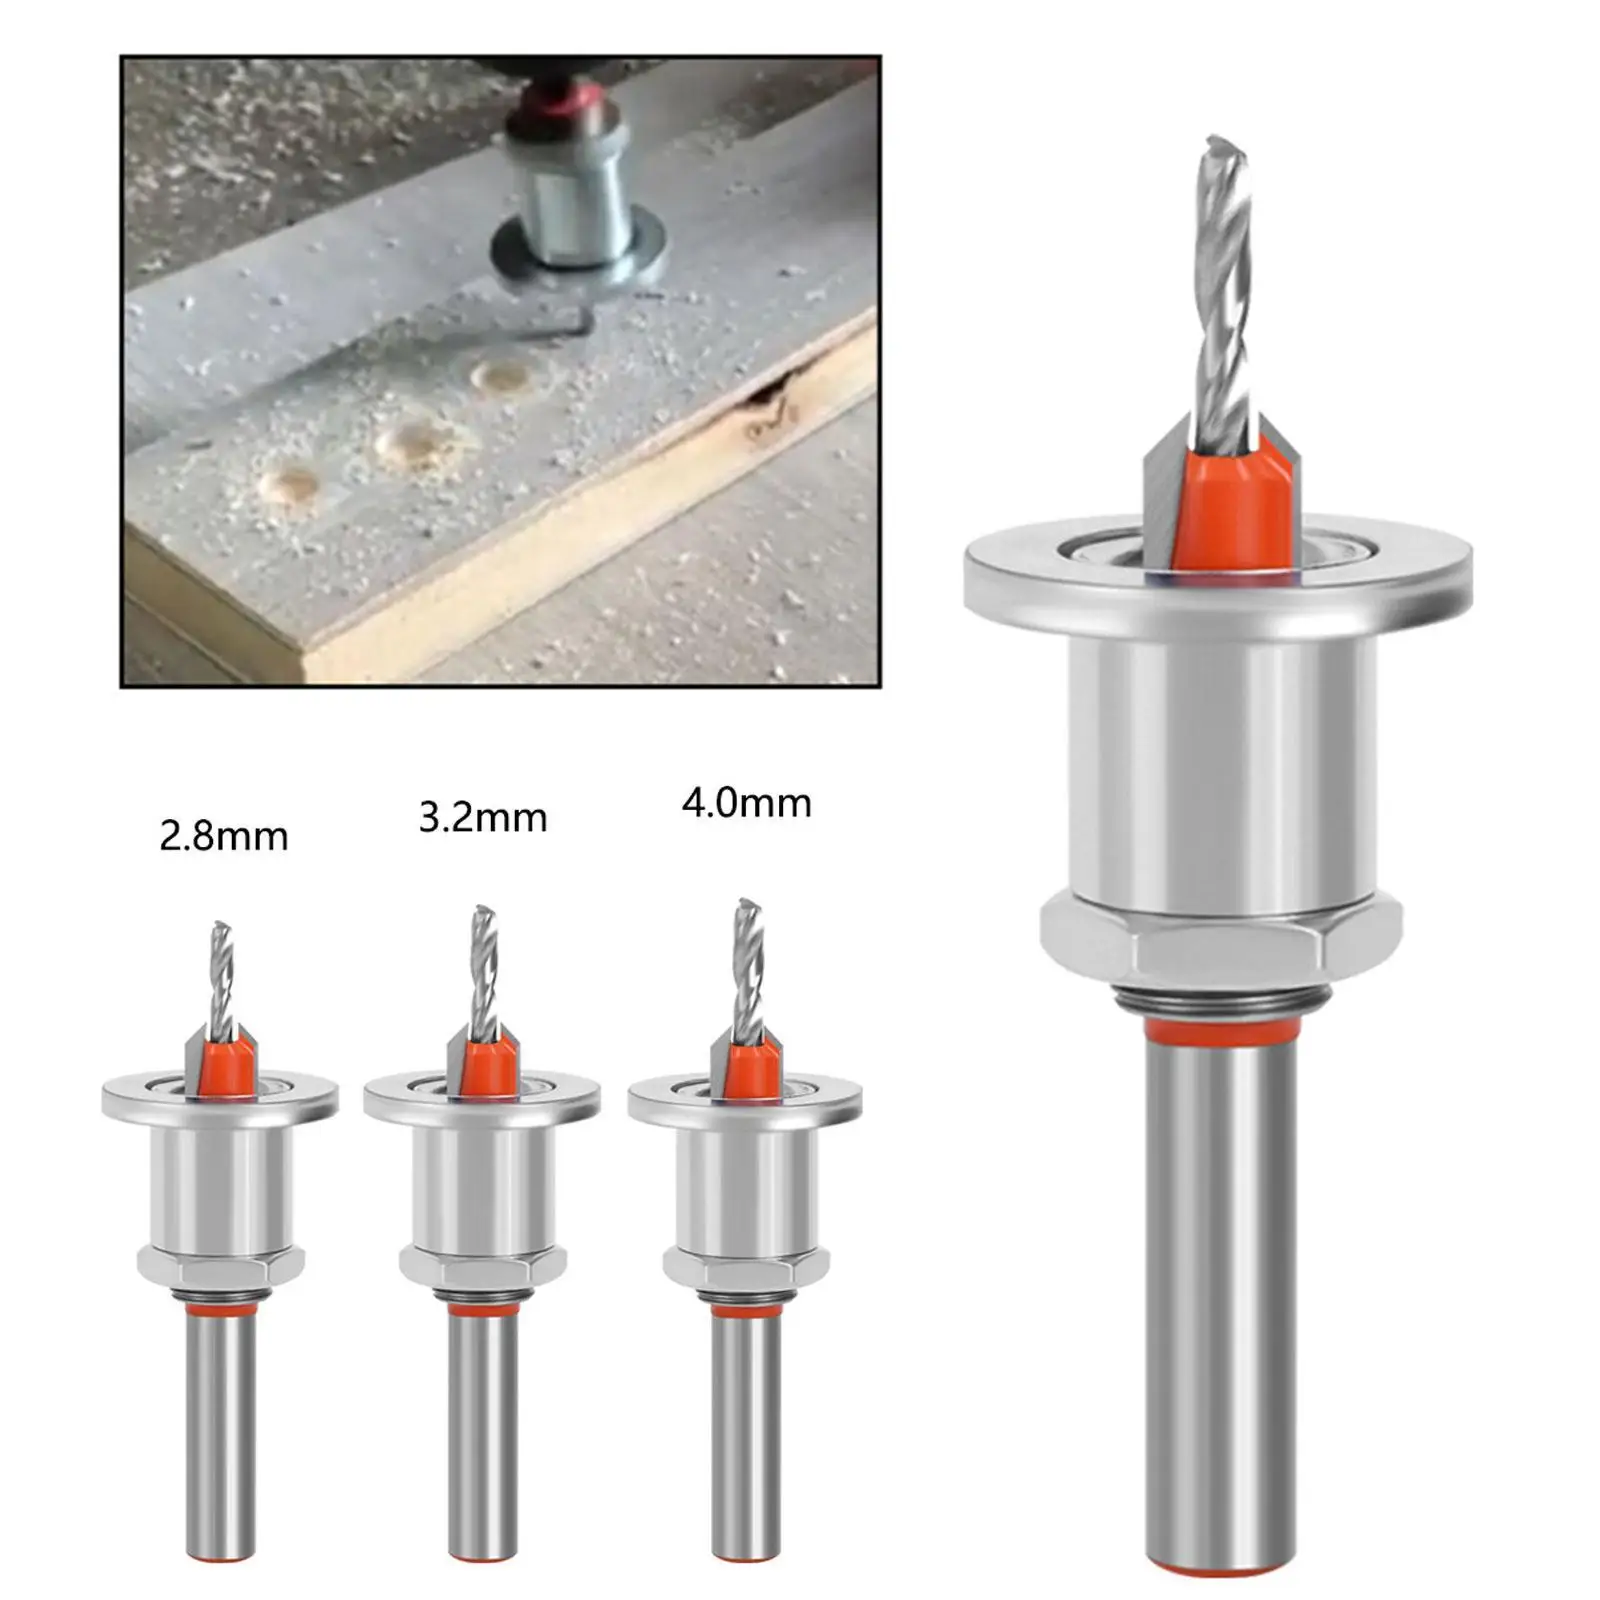 

8mm Shank HSS Countersink Woodworking Router Bit Set YG6X Carbide Tip Milling Cutter Screw Extractor Adjustable Counterbore Dril